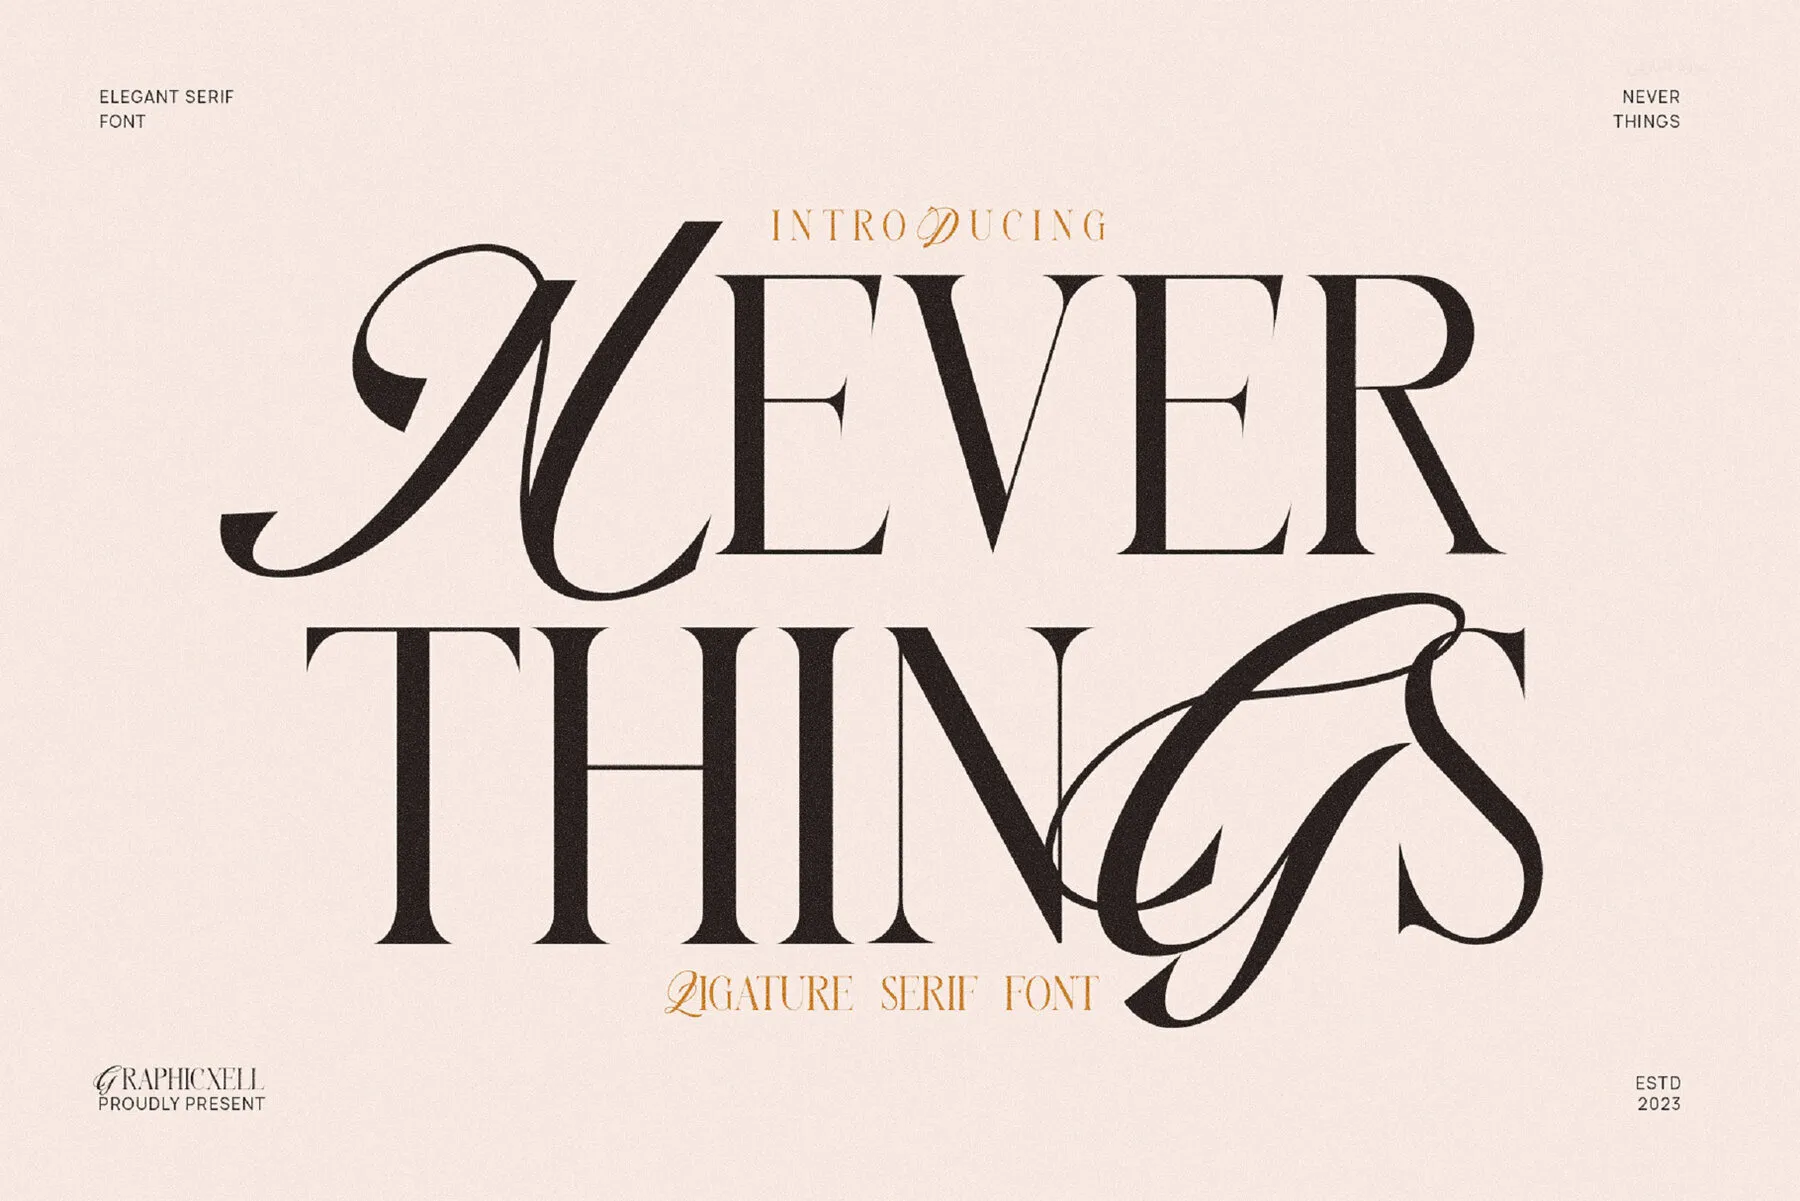 Never Things